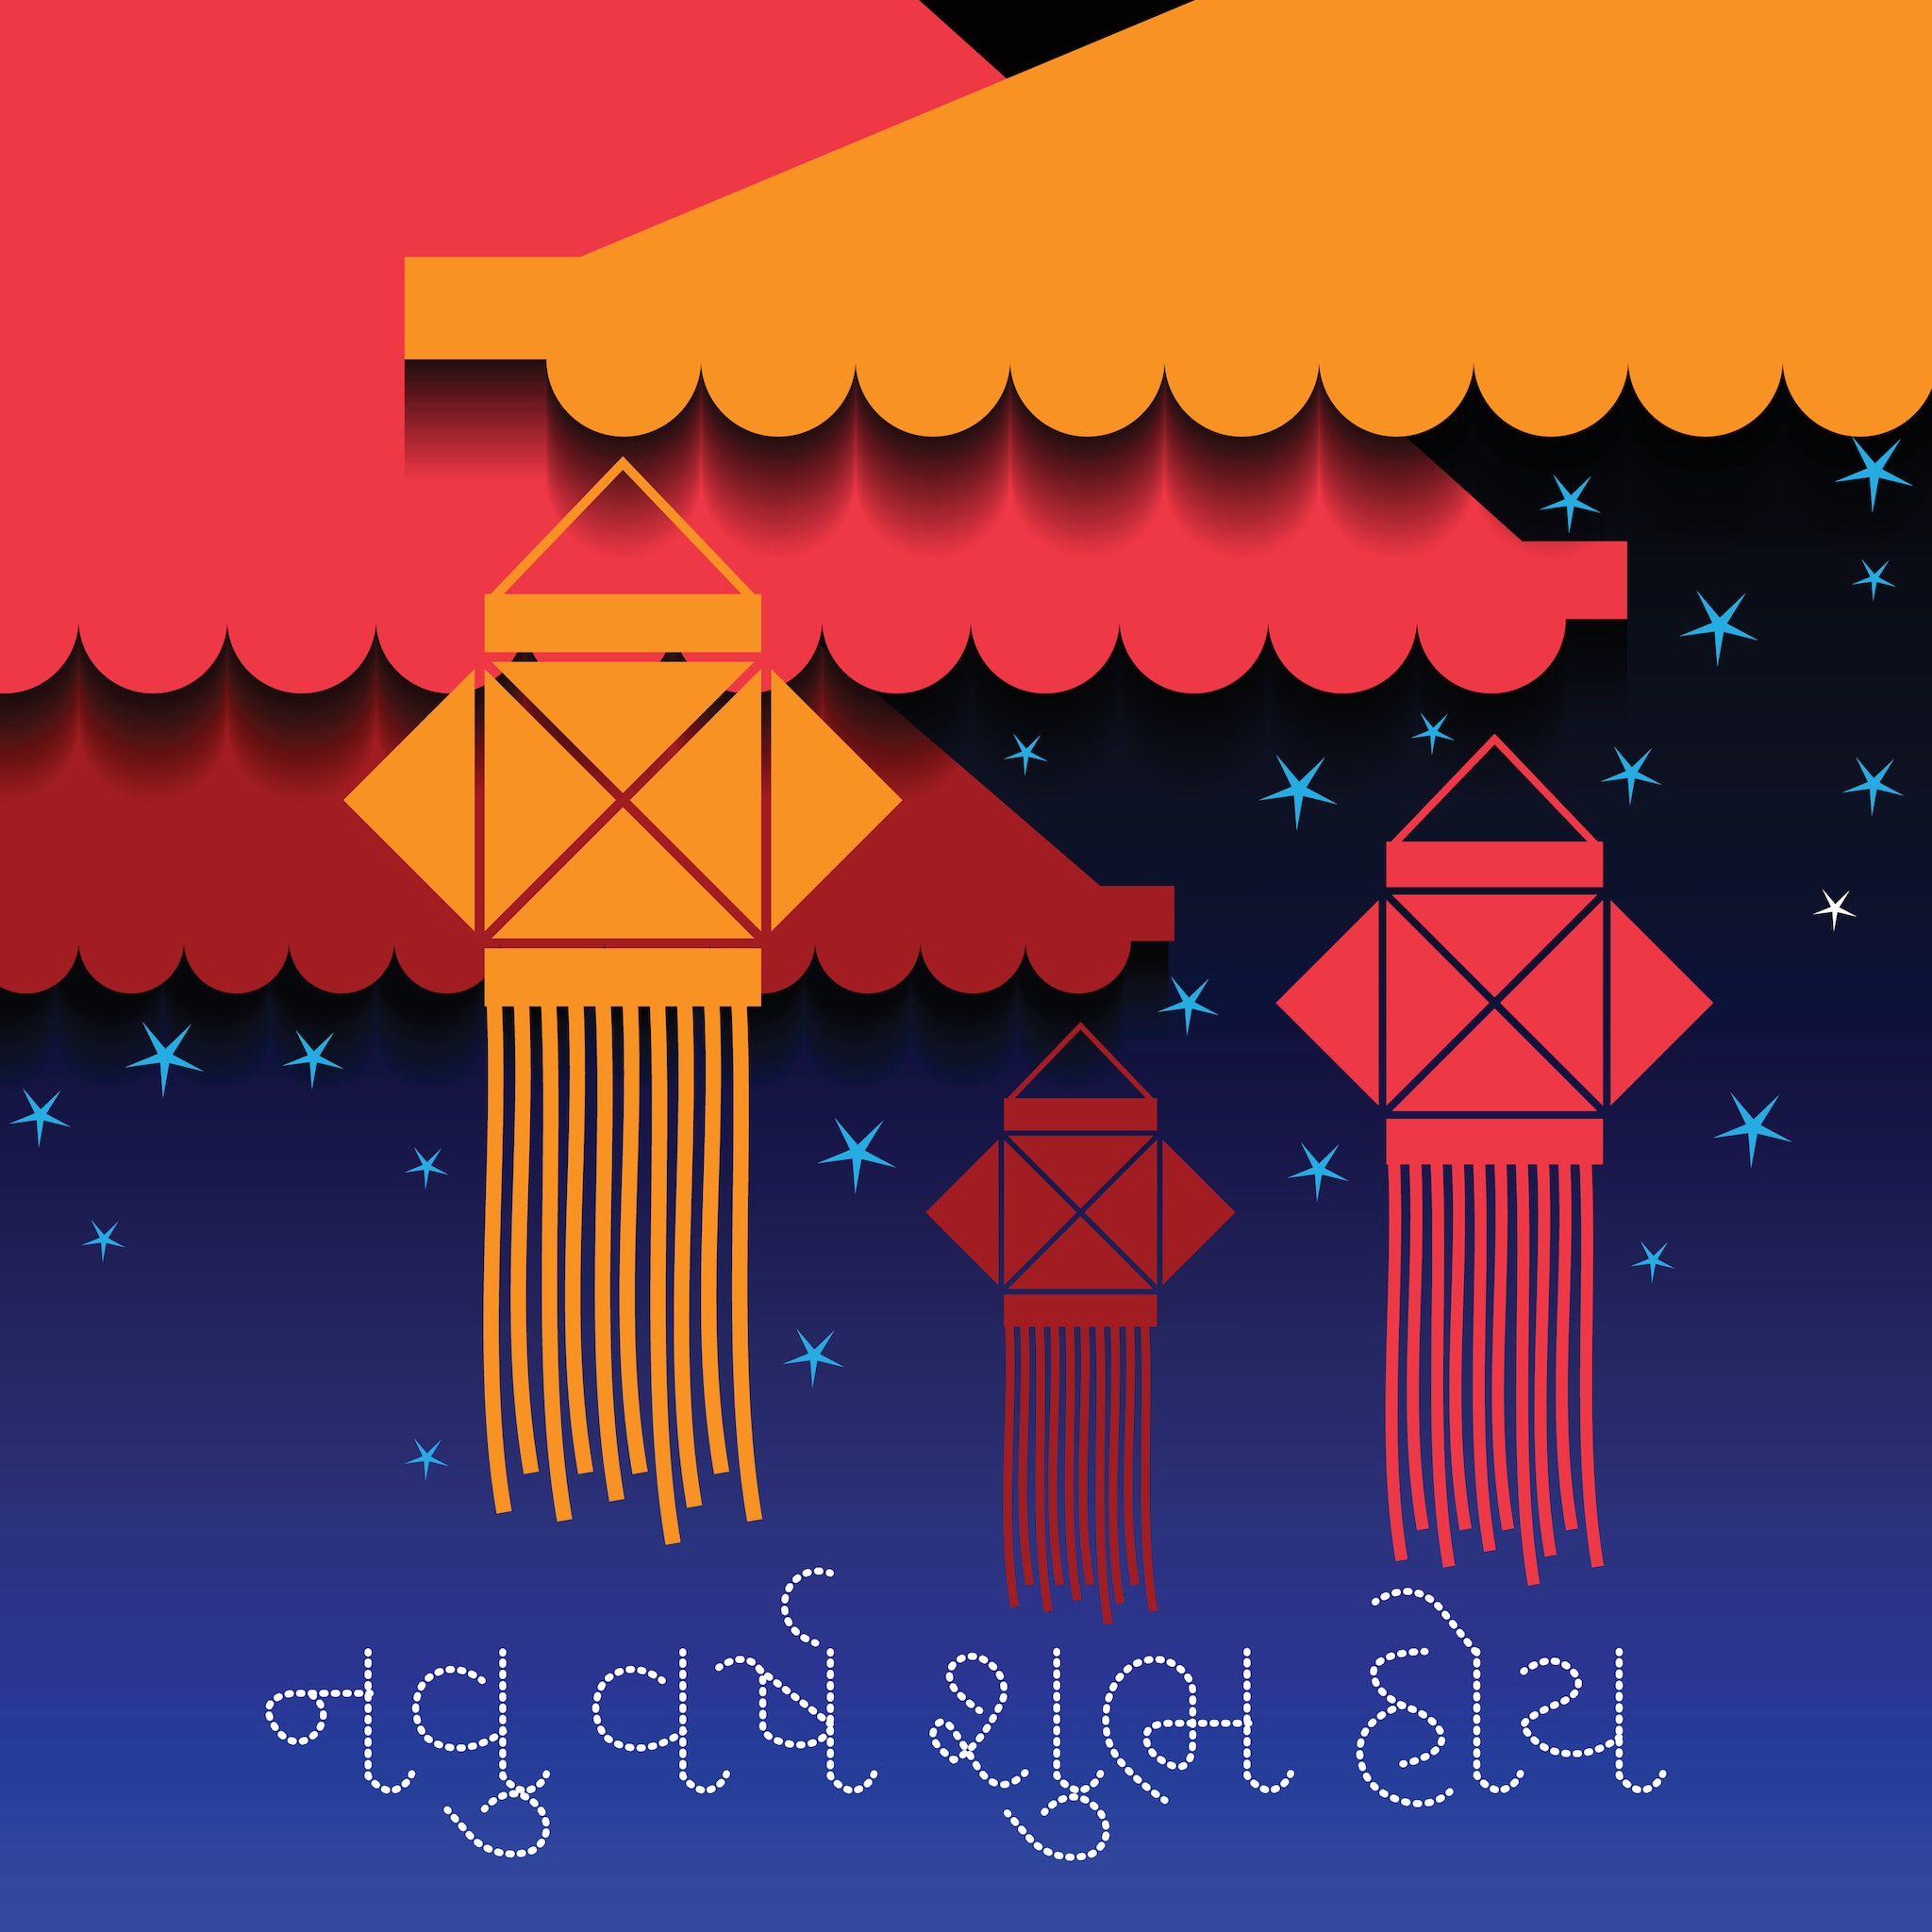 Happy Gujarati New Year 2021: Wishes, Greetings, Whatsapp Status, Images And Quotes You Can Share With Your Dear Ones. (Image: Shutterstock)